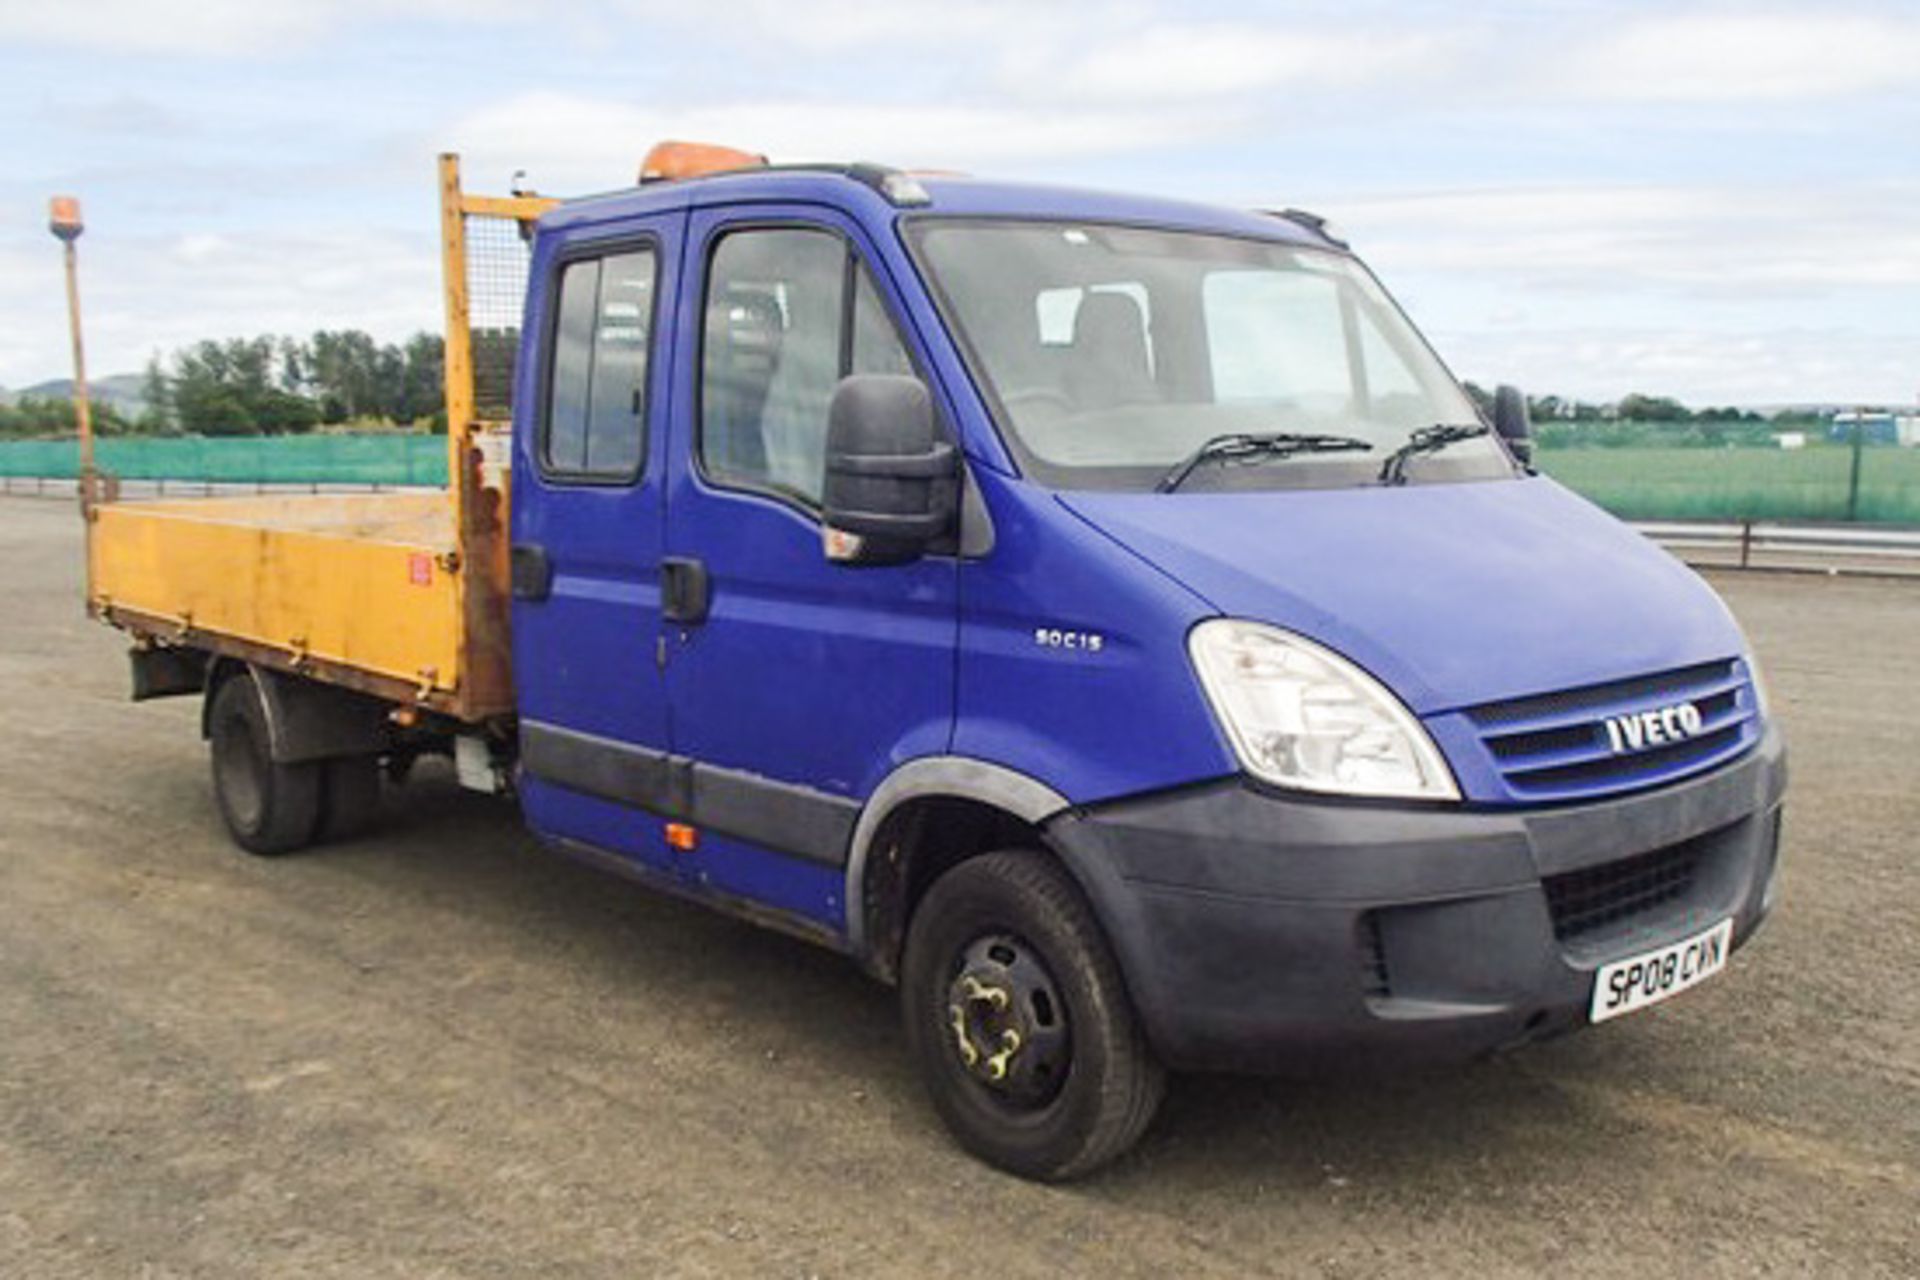 IVECO MODEL DAILY 50C15 - 2998cc - Image 3 of 24